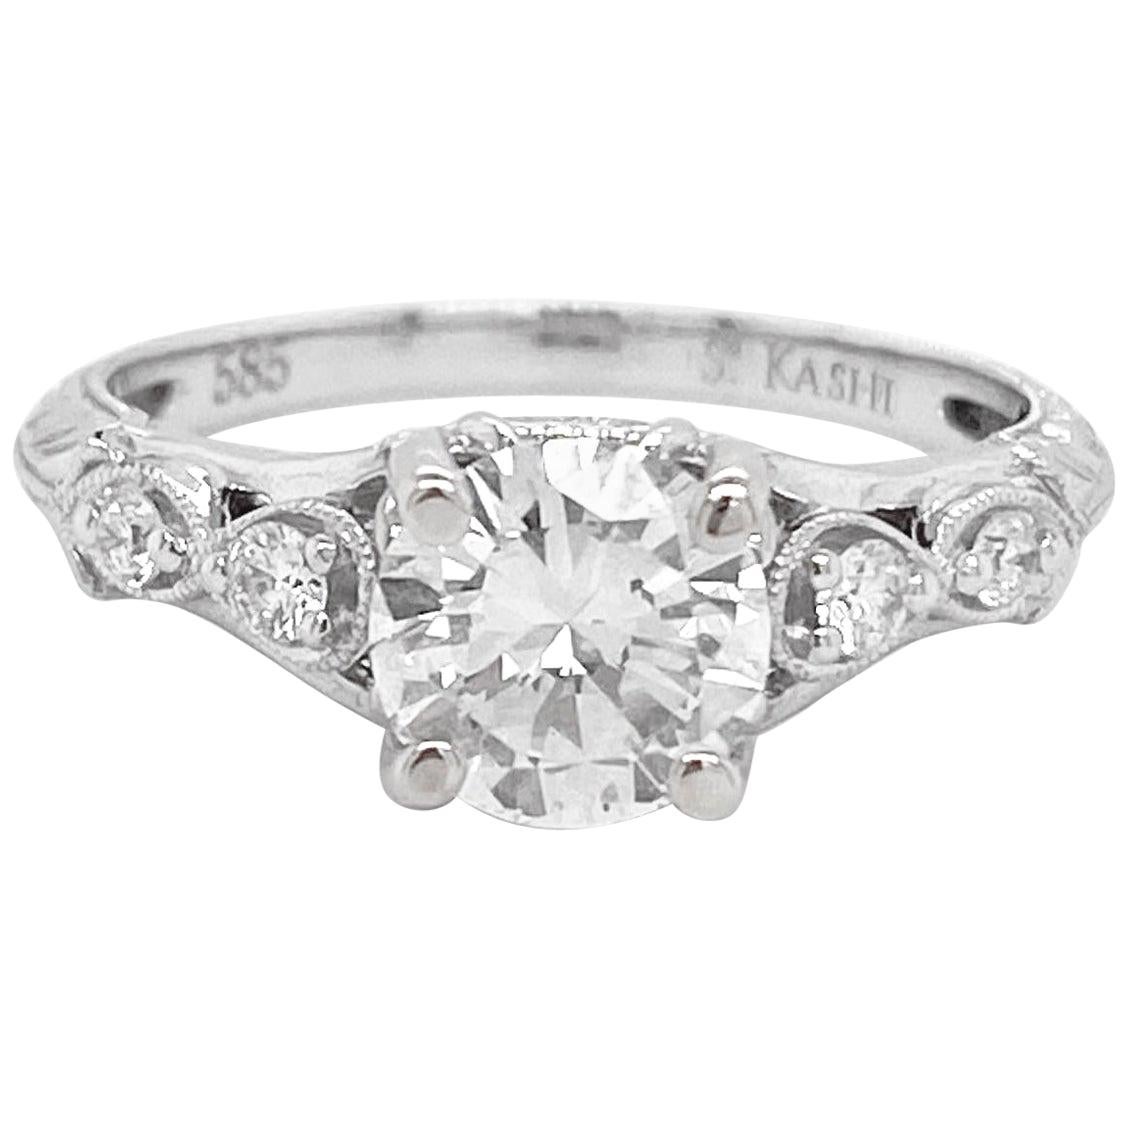 For Sale:  1 Carat Diamond Engagement Ring, White Gold, Round, Vintage, Detailed